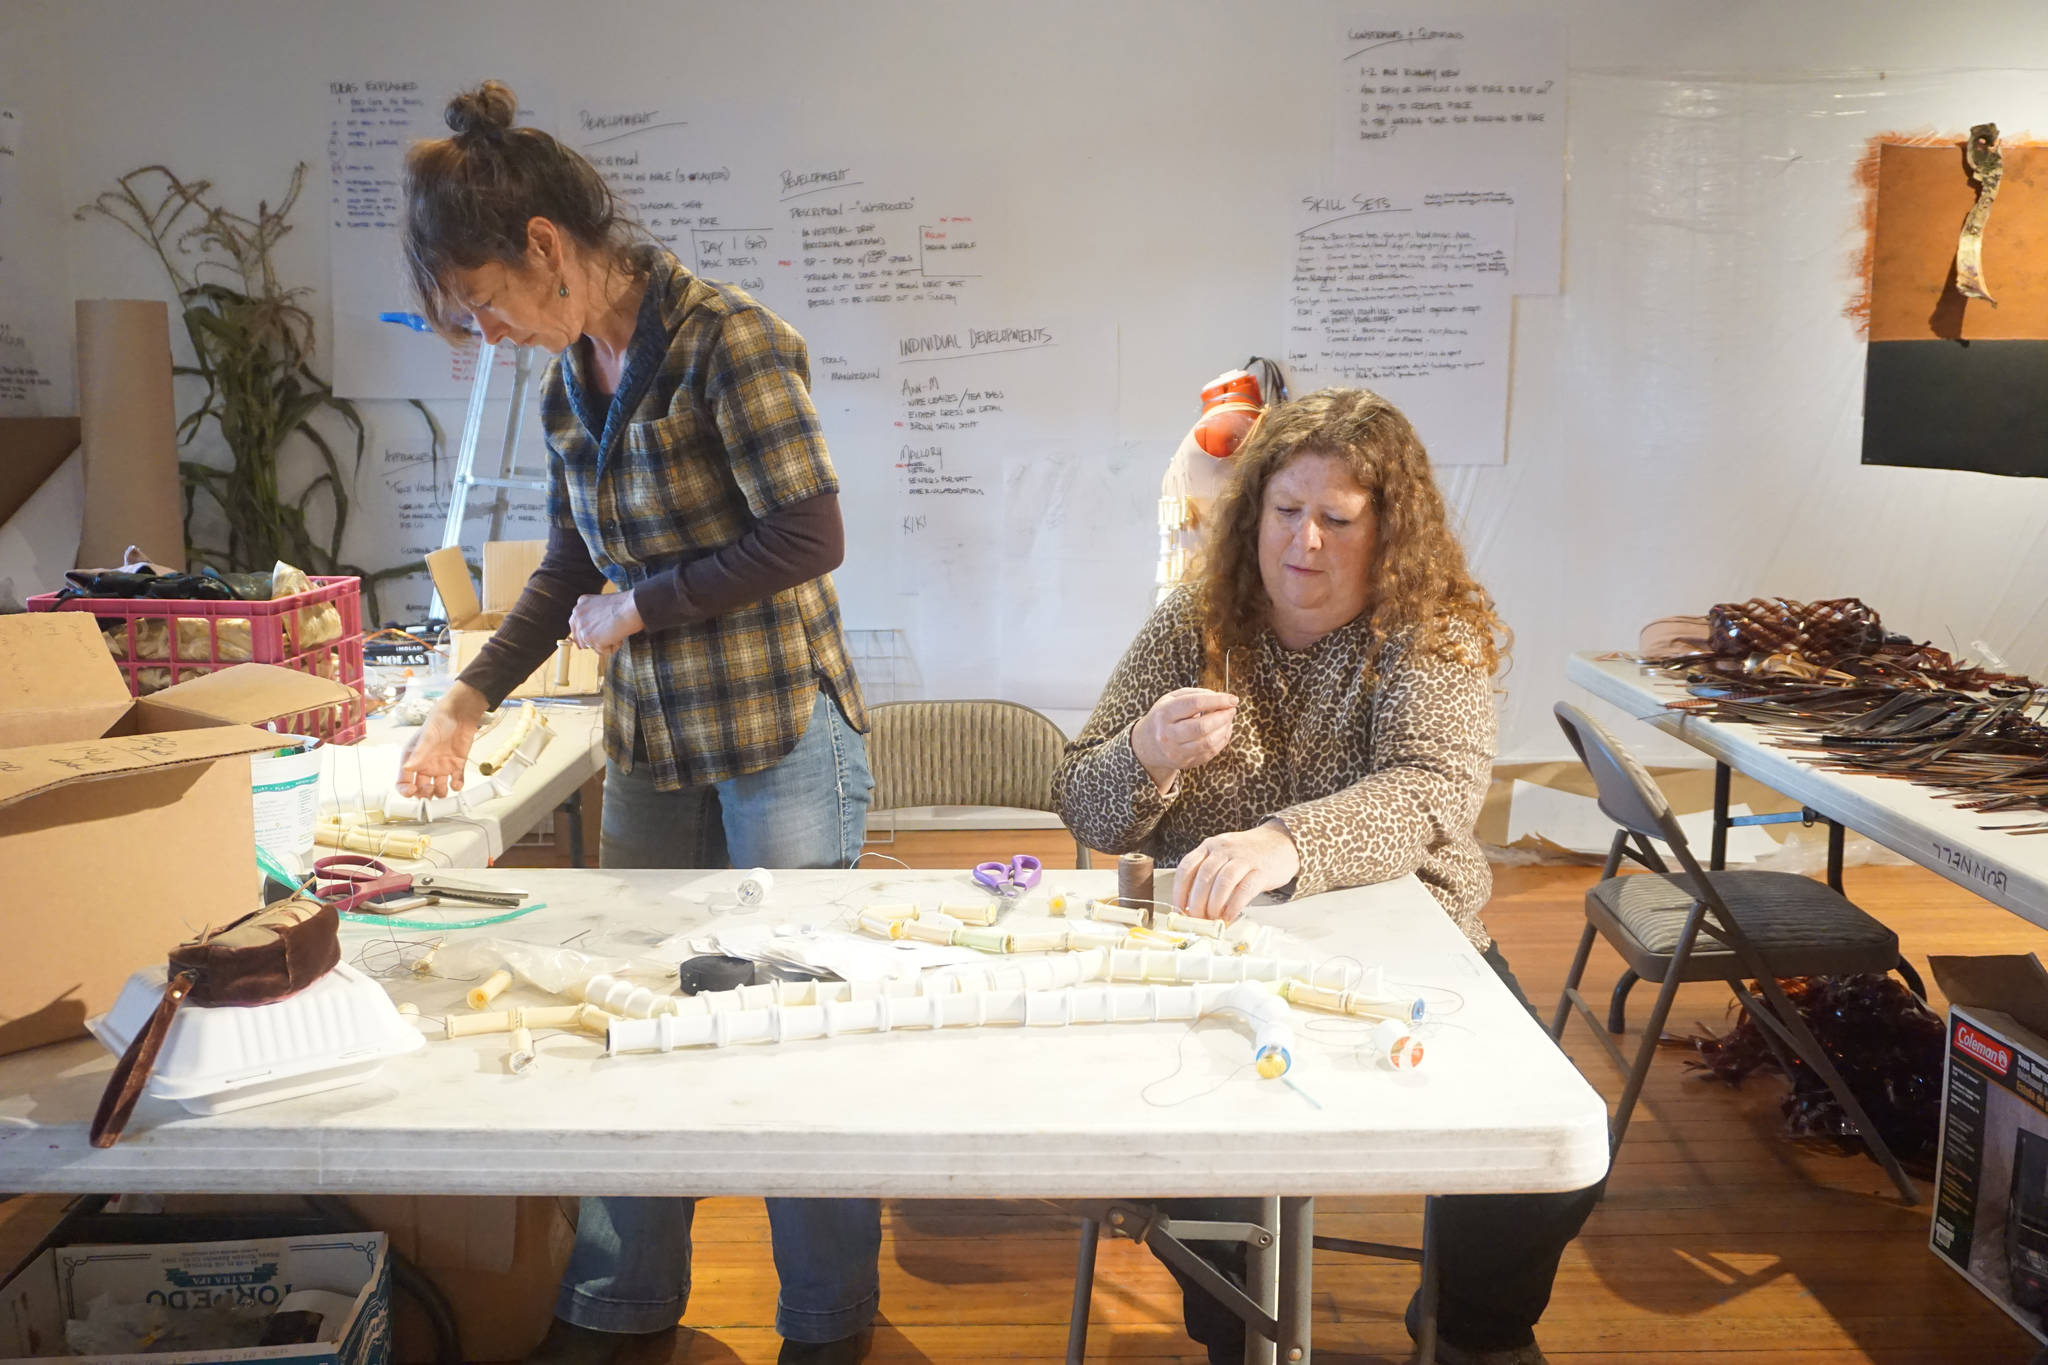 Asia Freeman, left, and Linda Skeleton, right, assemble Wearable Arts pieces Saturday, Oct. 14, 2017 at a workshop with Sheila Wyne at the Bunnell Street Arts Center in Homer, Alaska. Wyne is artist in residence at Bunnell at a residency sponsored by the Homer Fiber Arts Collective. (Photo by Michael Armstrong)